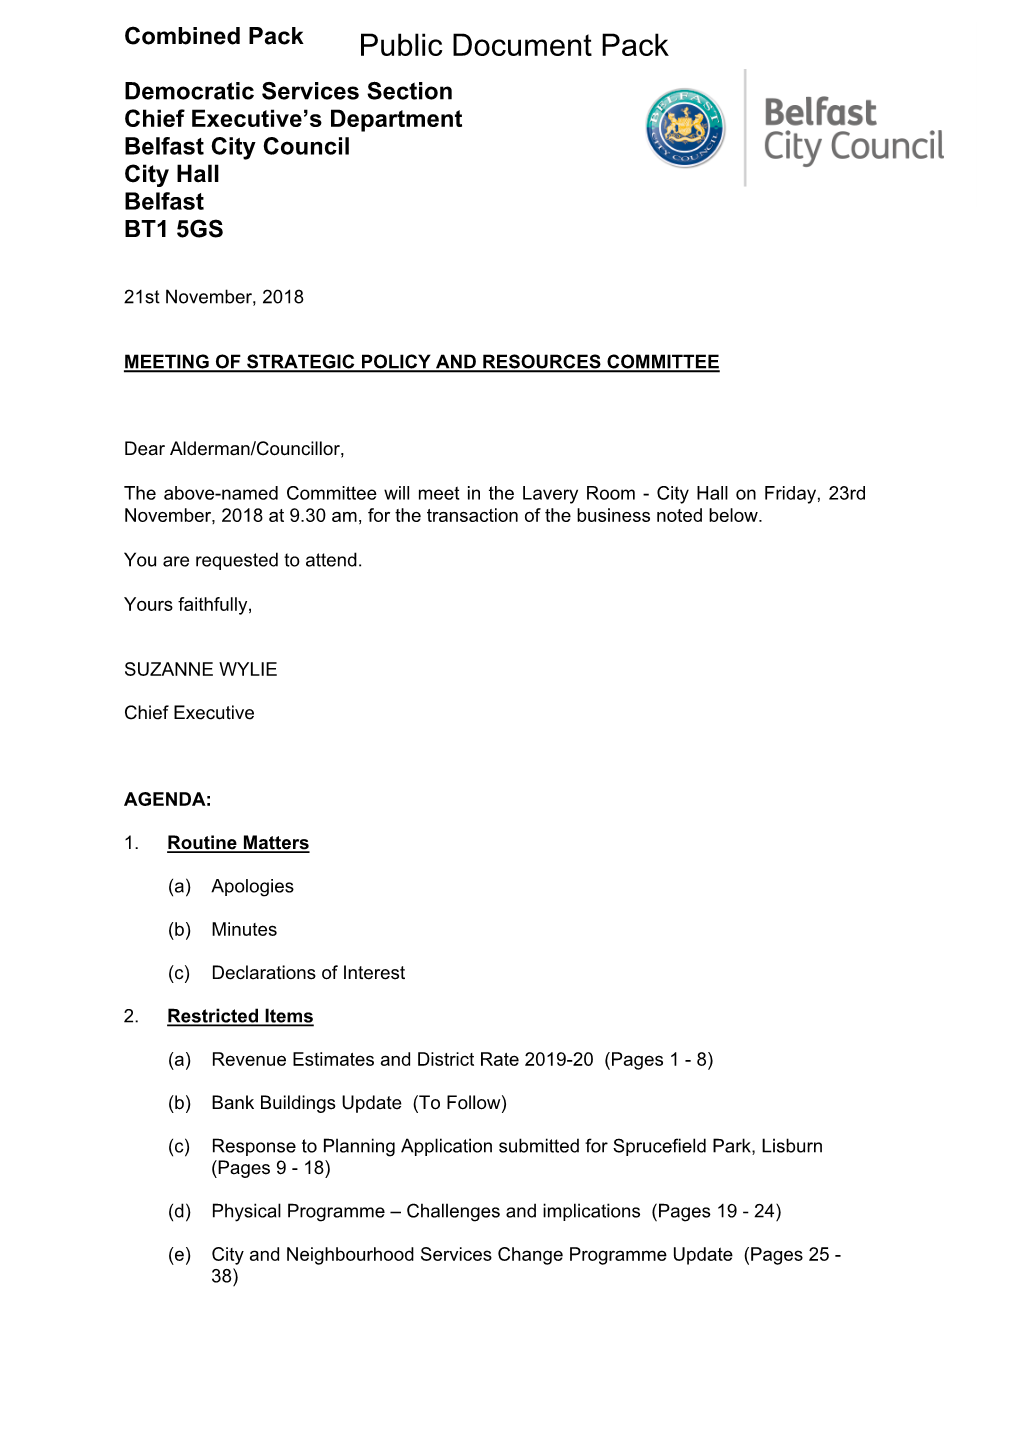 (Public Pack)Combined Pack Agenda Supplement for Strategic Policy and Resources Committee, 23/11/2018 09:30